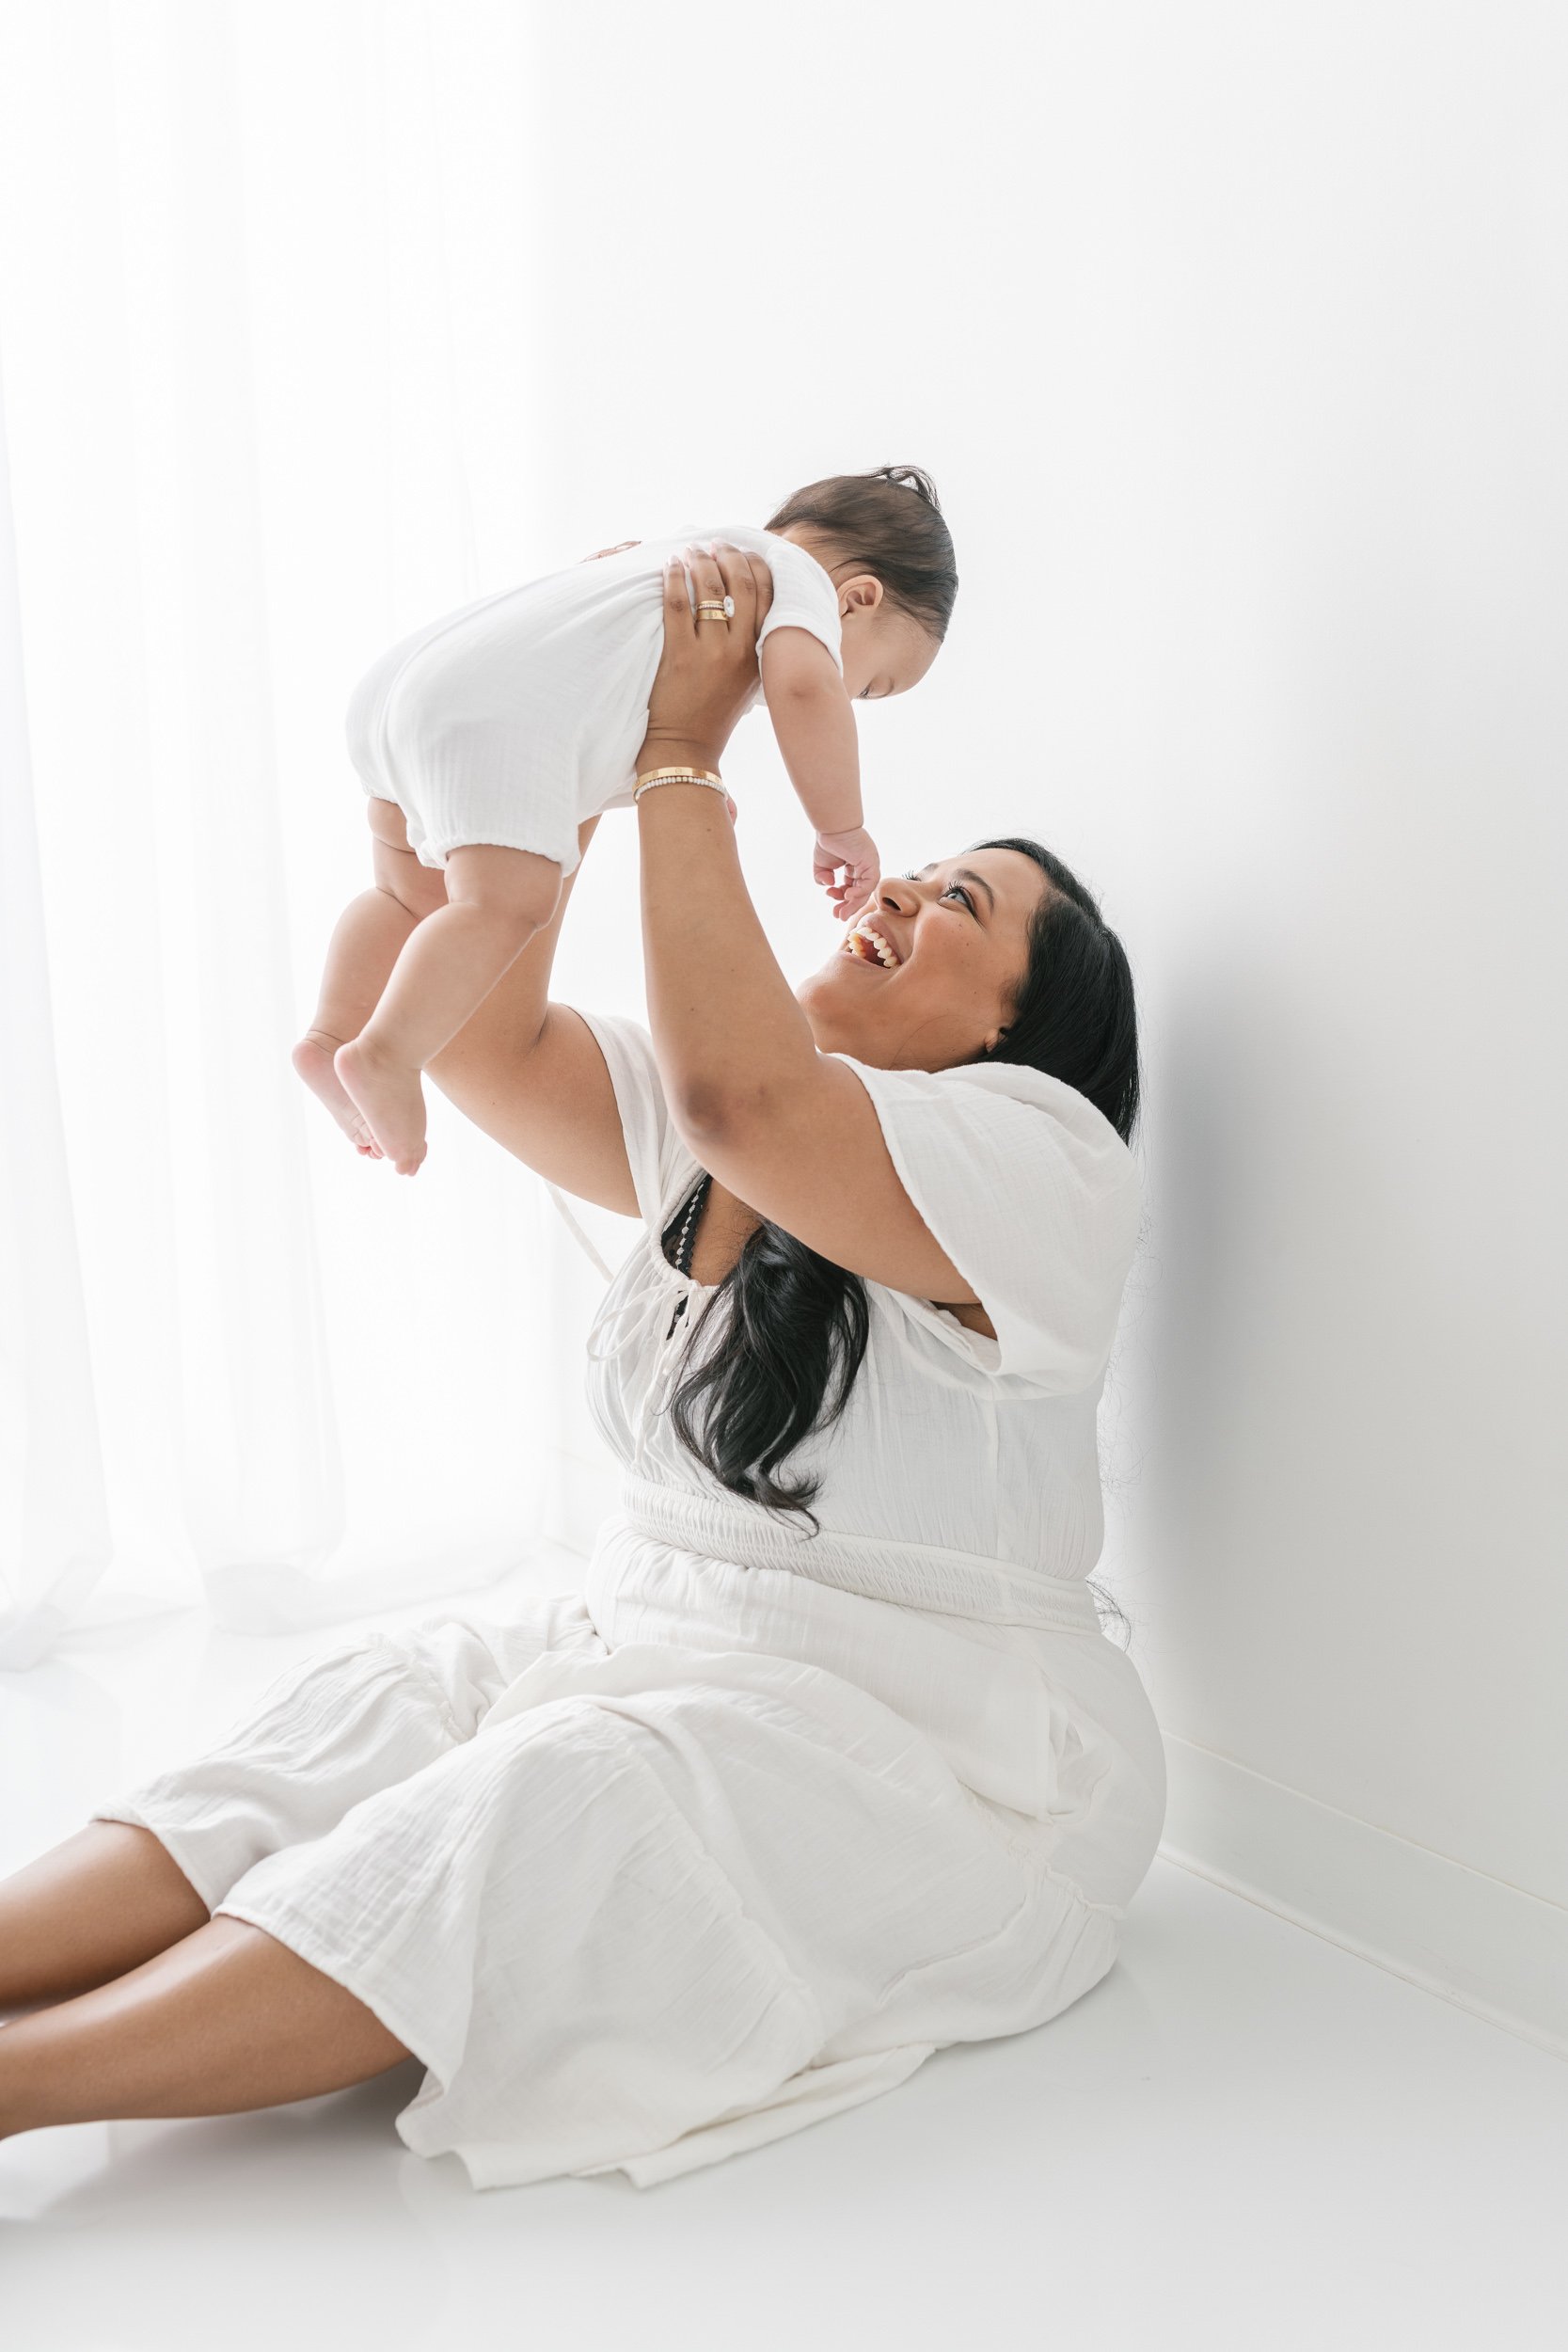  A mother lifts her baby in the air and smiles at him in New Jersey by Nicole Hawkins Photography. mother holding a baby boy in air toddler baby portraits motherhood #NicoleHawkinsPhotography #NicolewHawkinsNewborns #NewJerseyNewborns #NewJerseyStudi